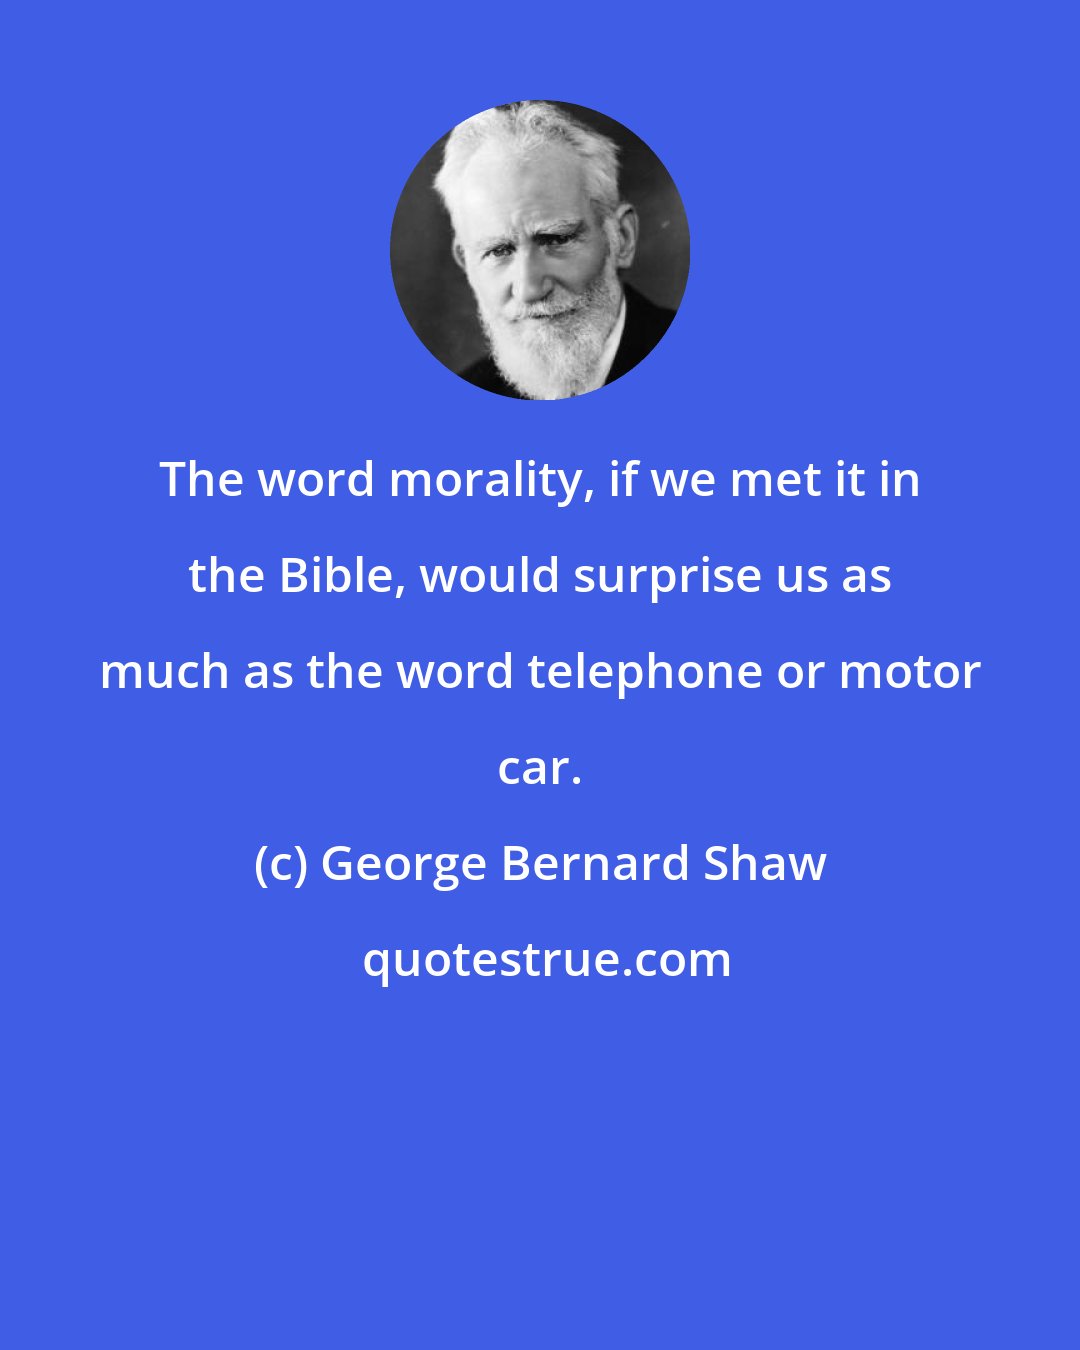 George Bernard Shaw: The word morality, if we met it in the Bible, would surprise us as much as the word telephone or motor car.